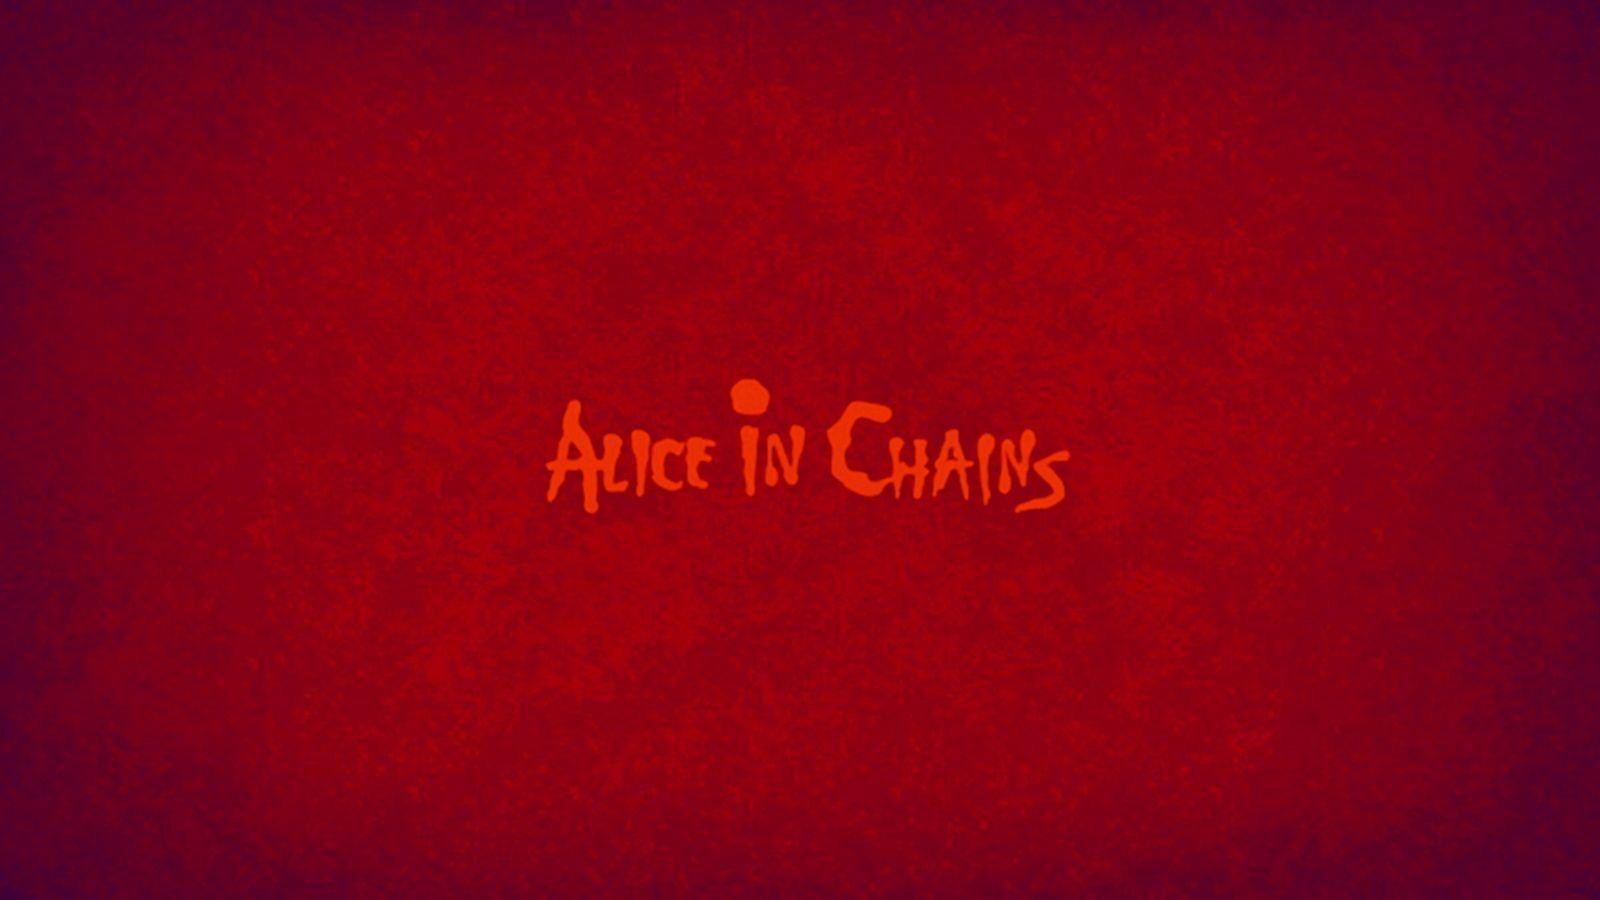 More Like Alice In Chains